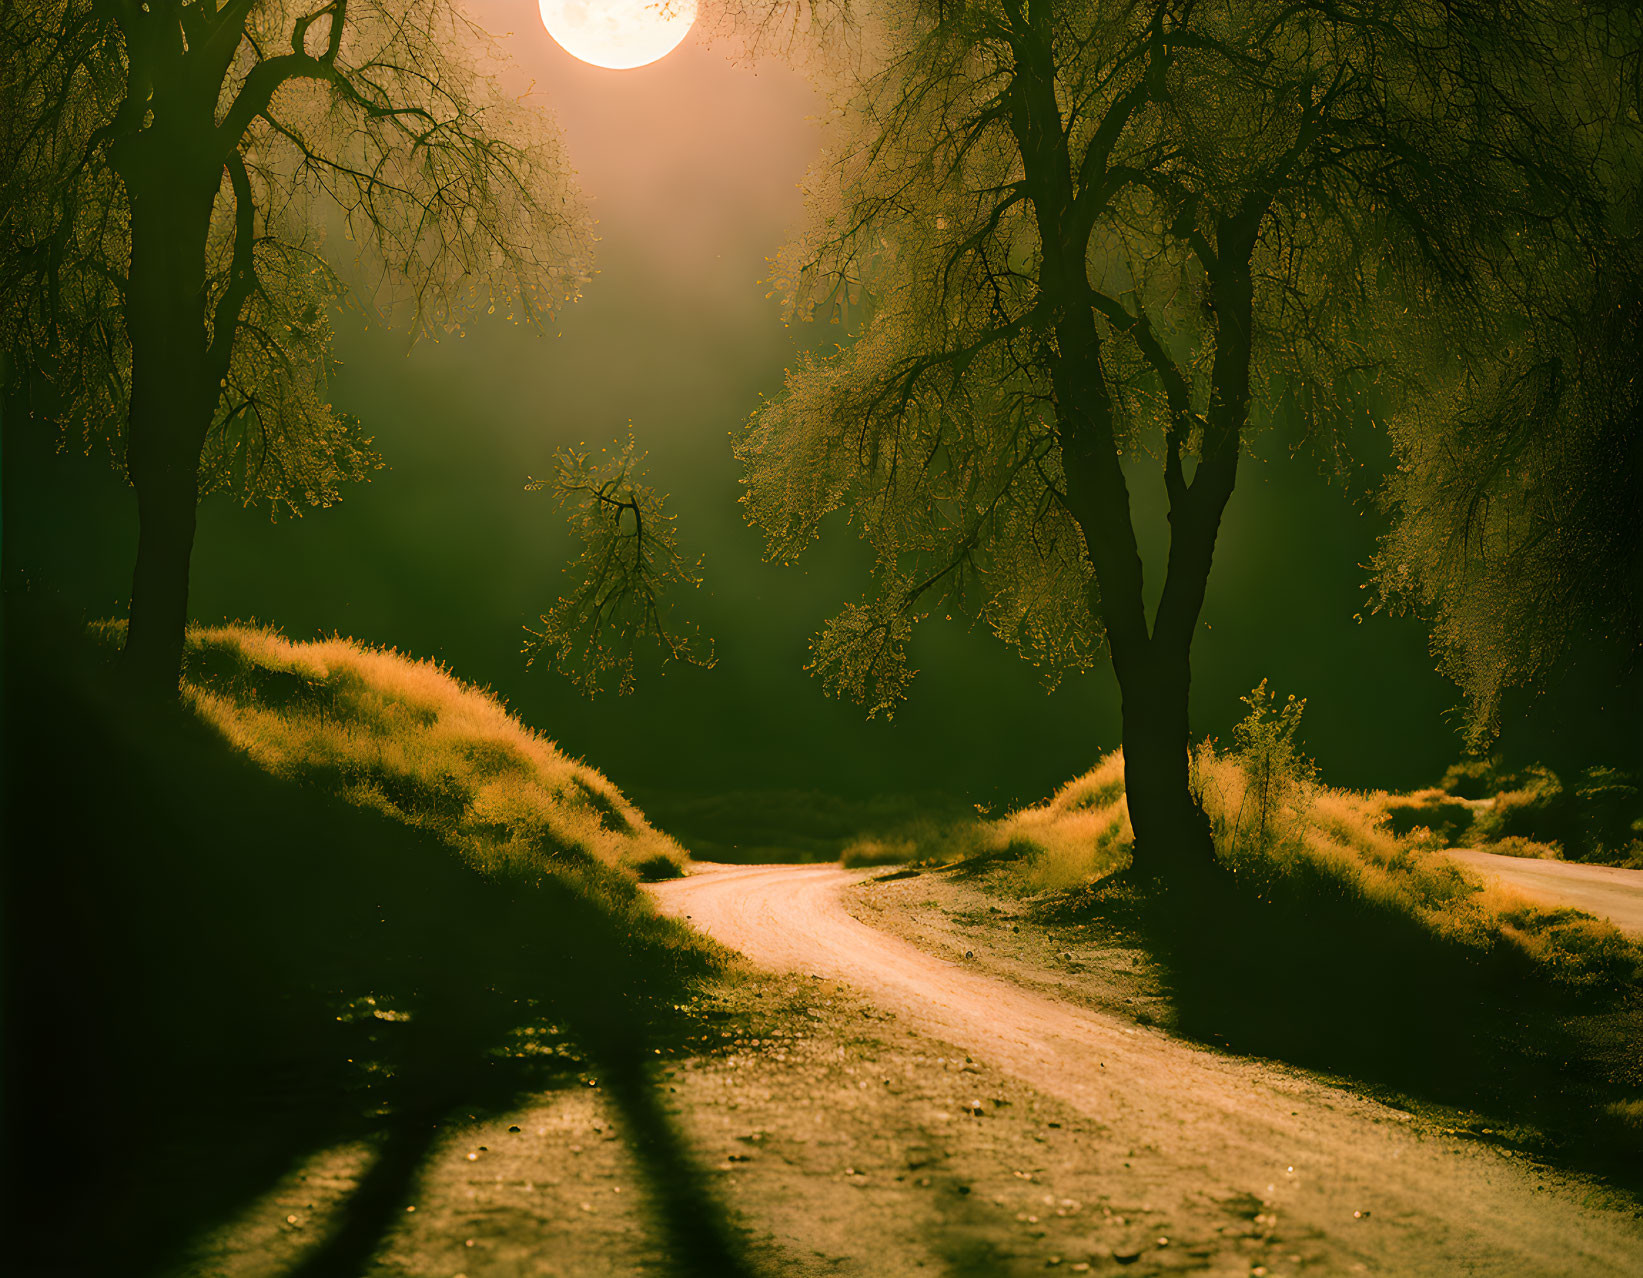 Moonlit dirt road surrounded by silhouetted trees in mystical setting